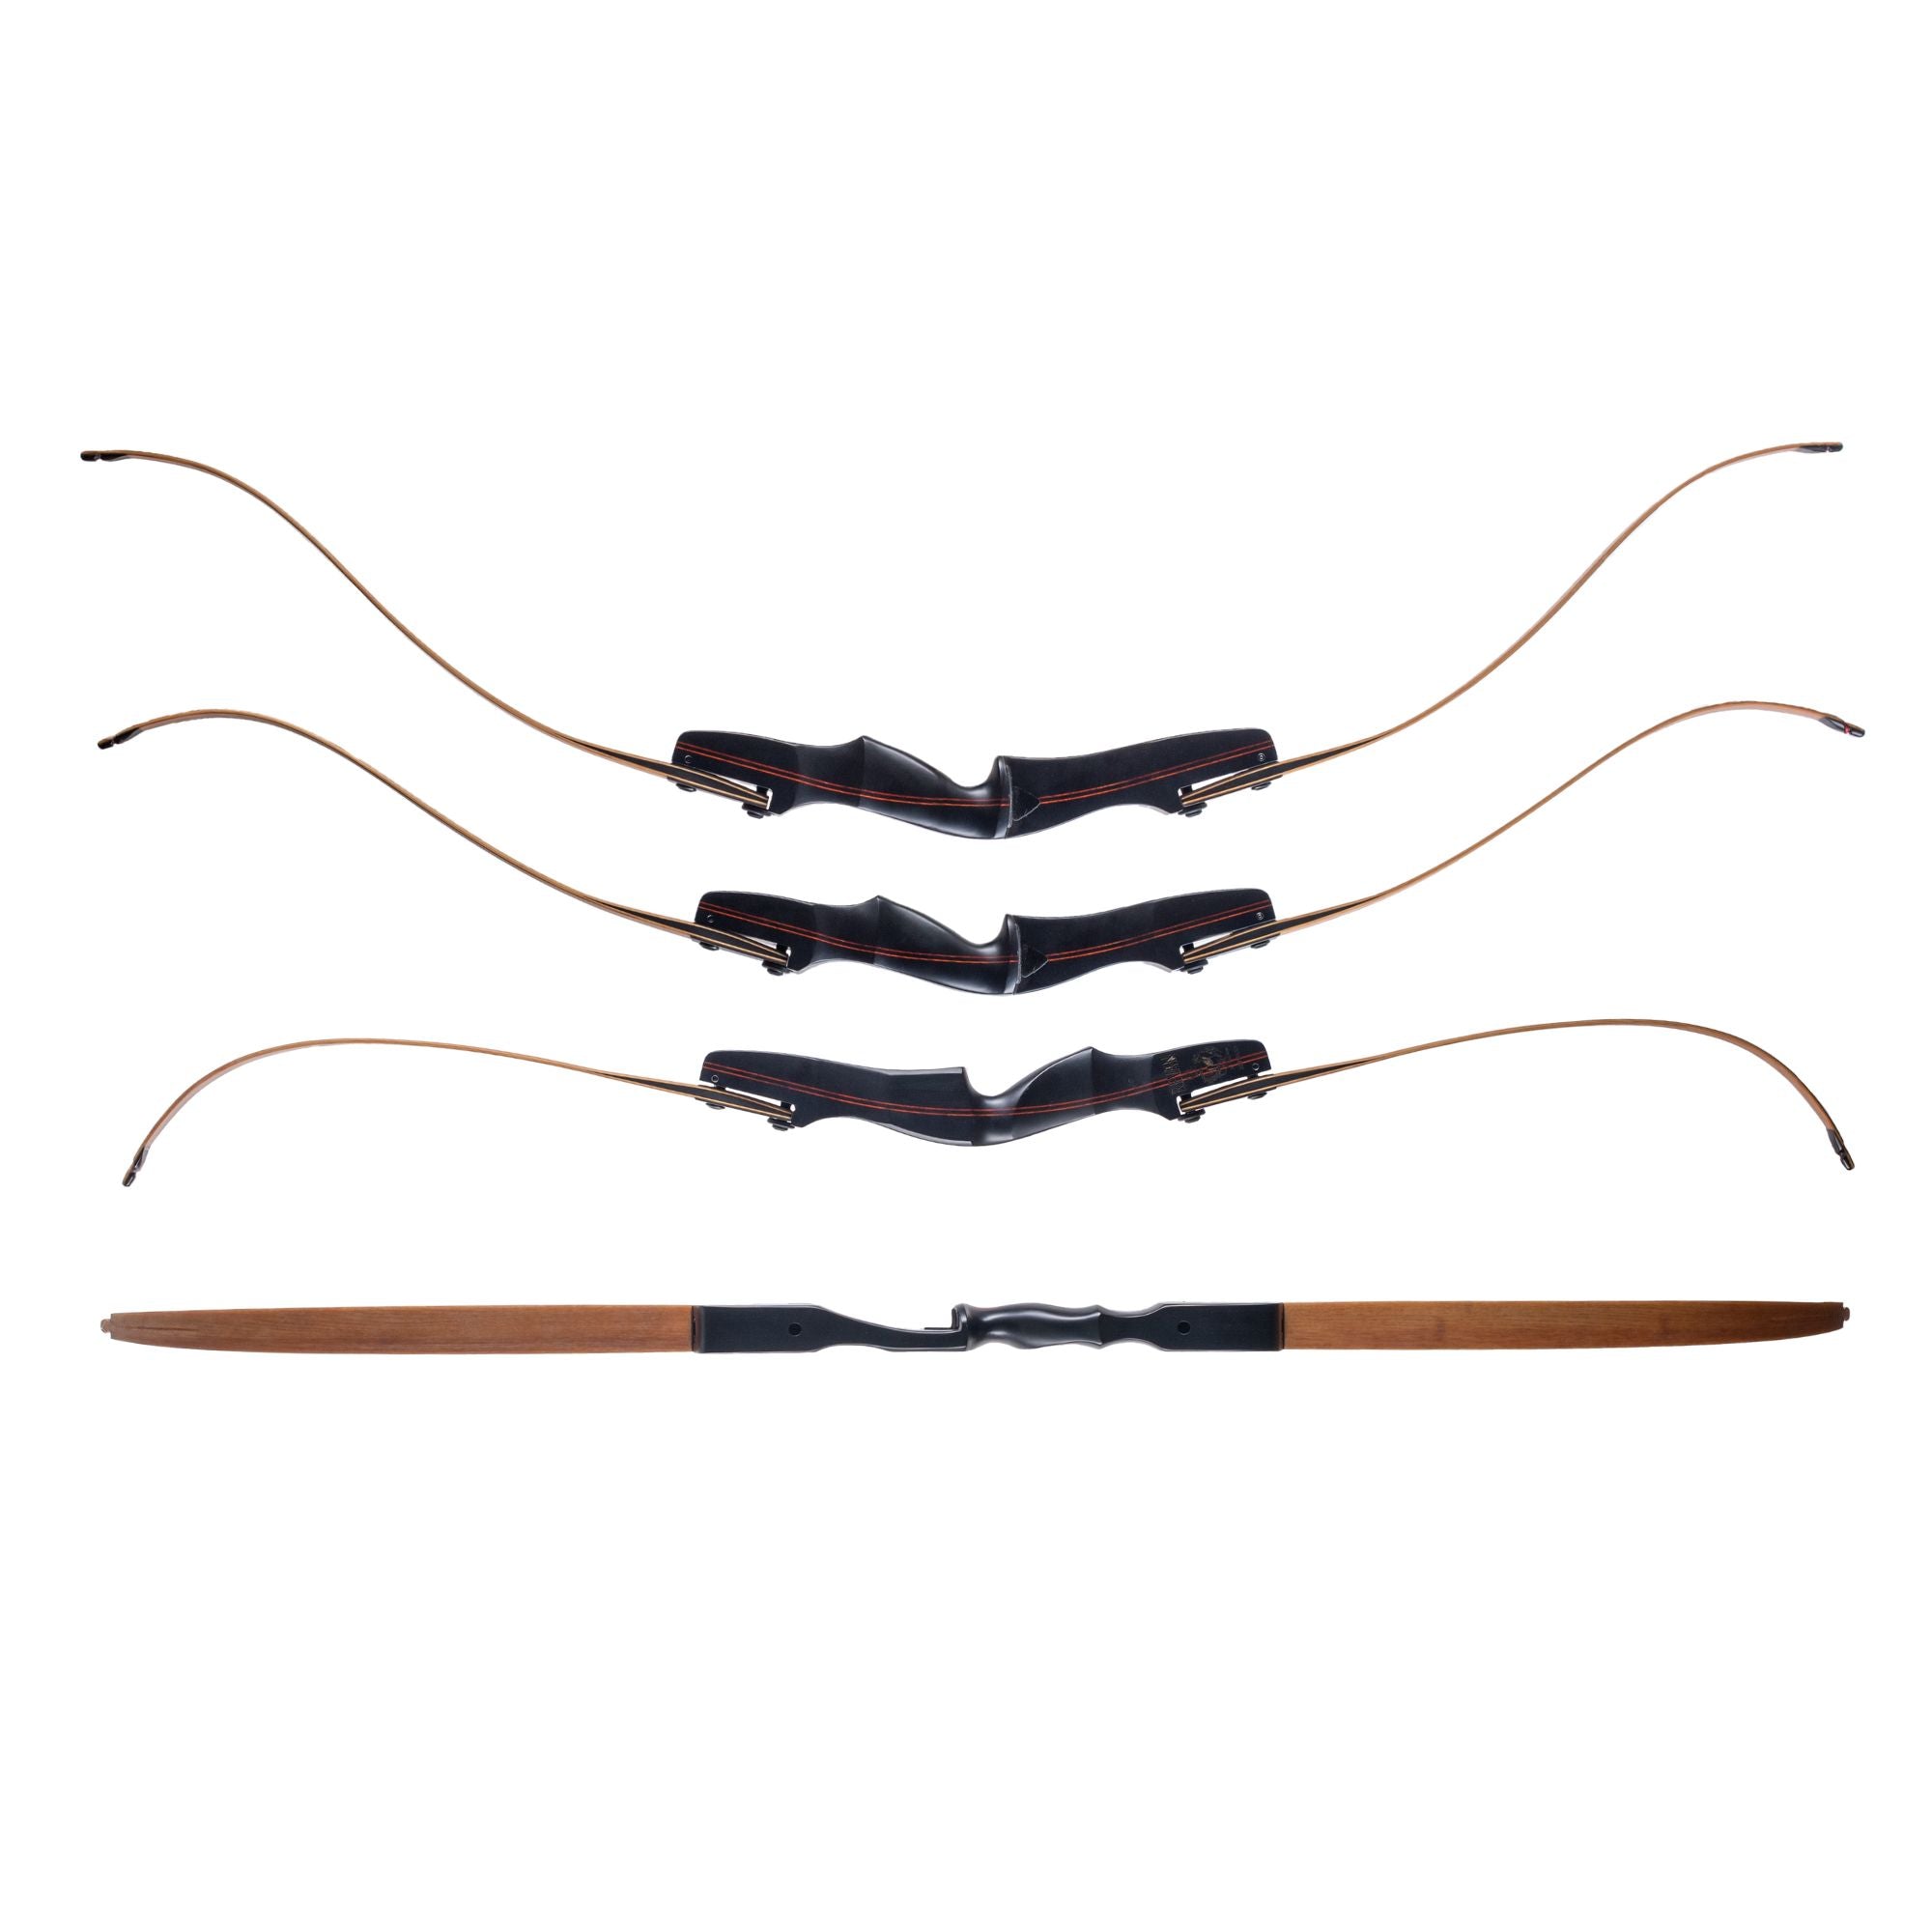 REVAN BY FAIRBOW BLACK ILF HUNTING RECURVE-Bow-Fairbow-Left handed-58 inch bow (15 inch Riser)-25 lbs-Fairbow